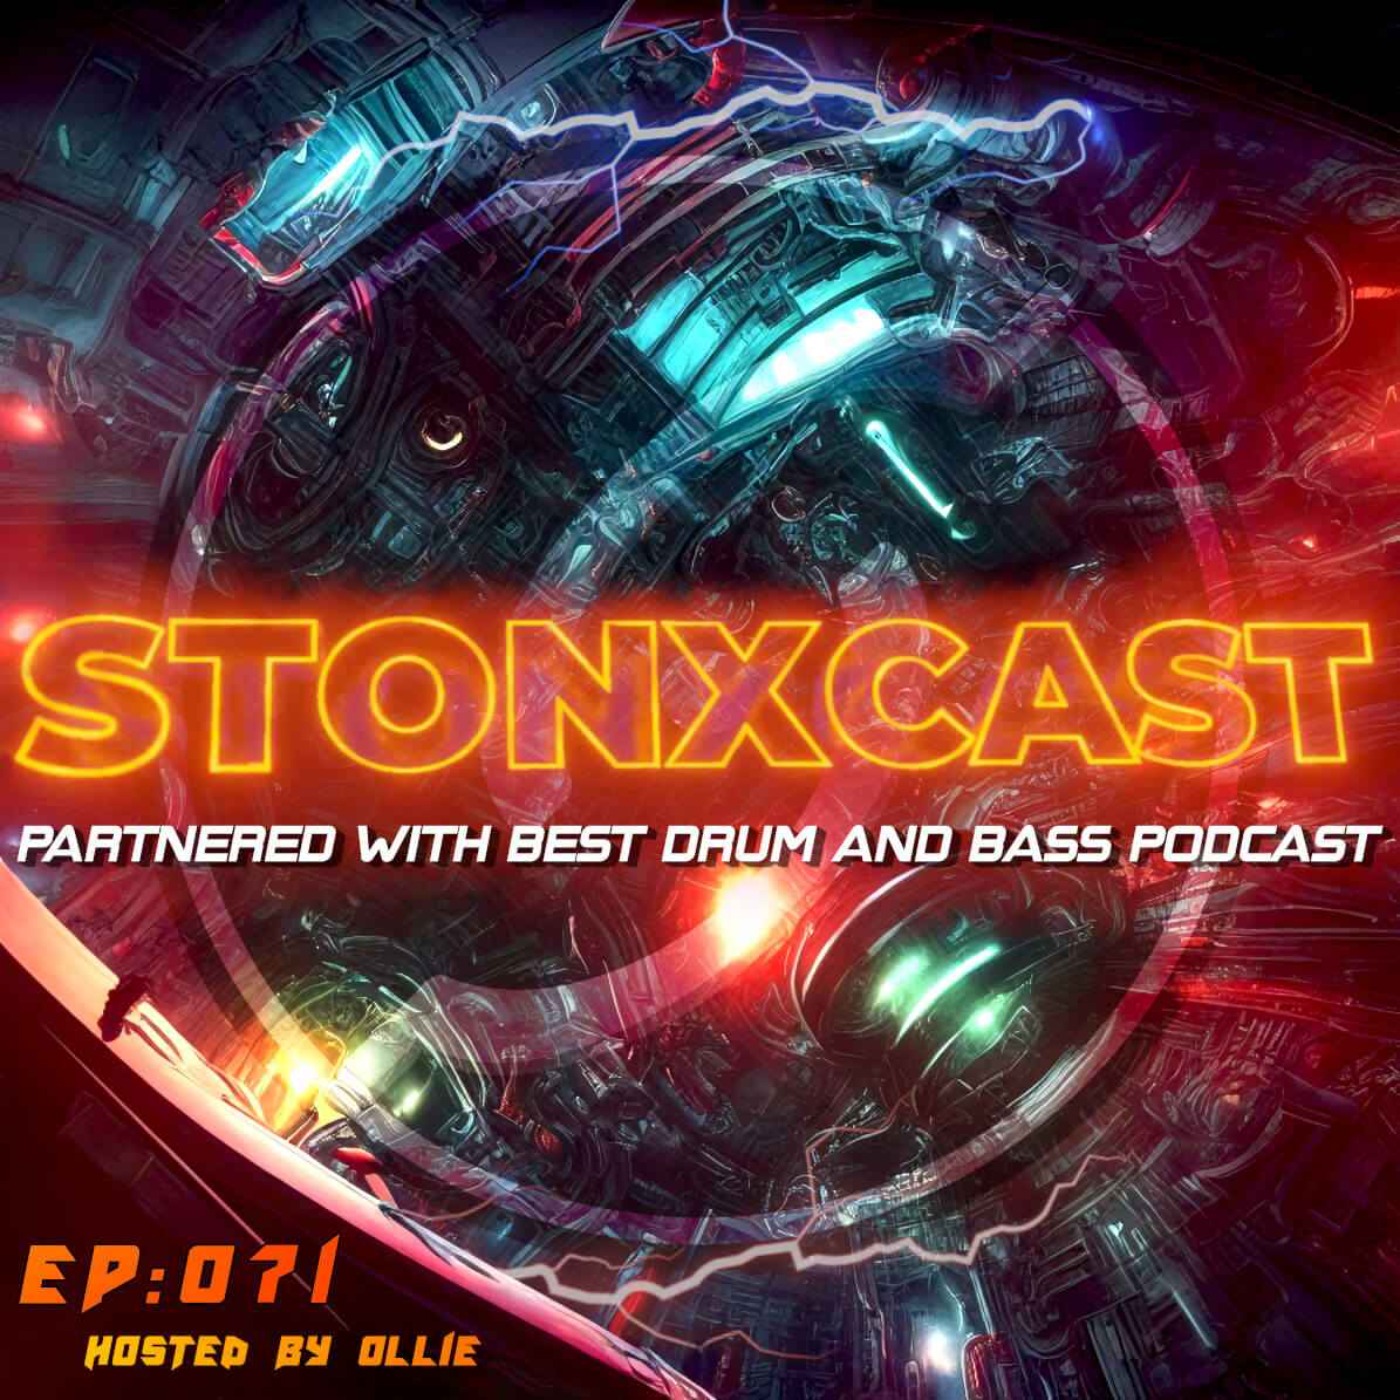 Stonxcast EP:071 - Hosted by Ollie Artwork